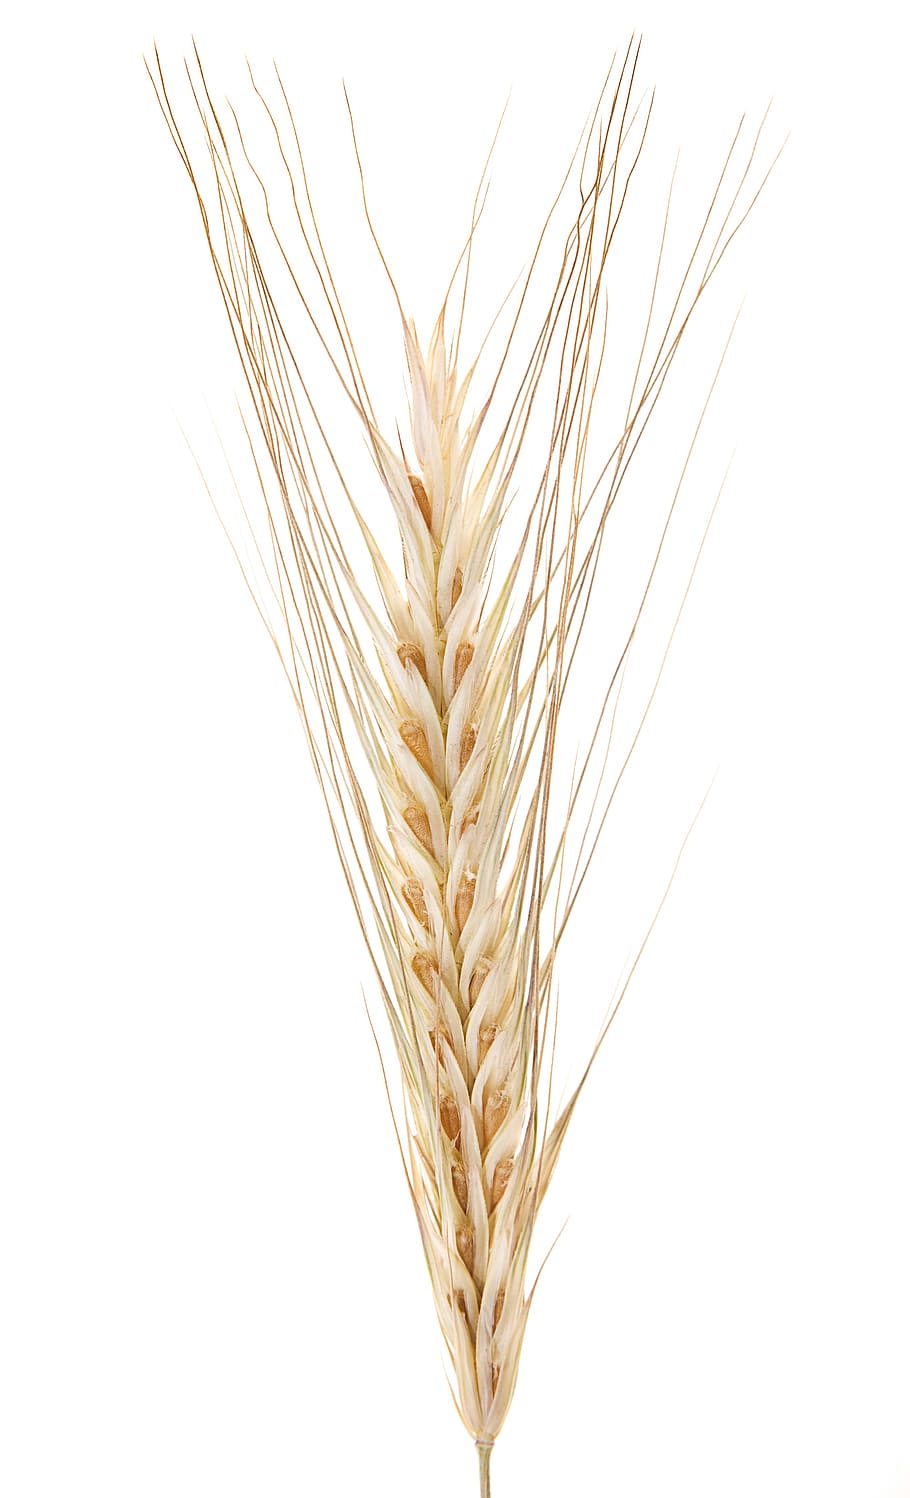 wheat, white, white background, studio shot, close-up, crop, plant, cereal plant, agriculture, nature